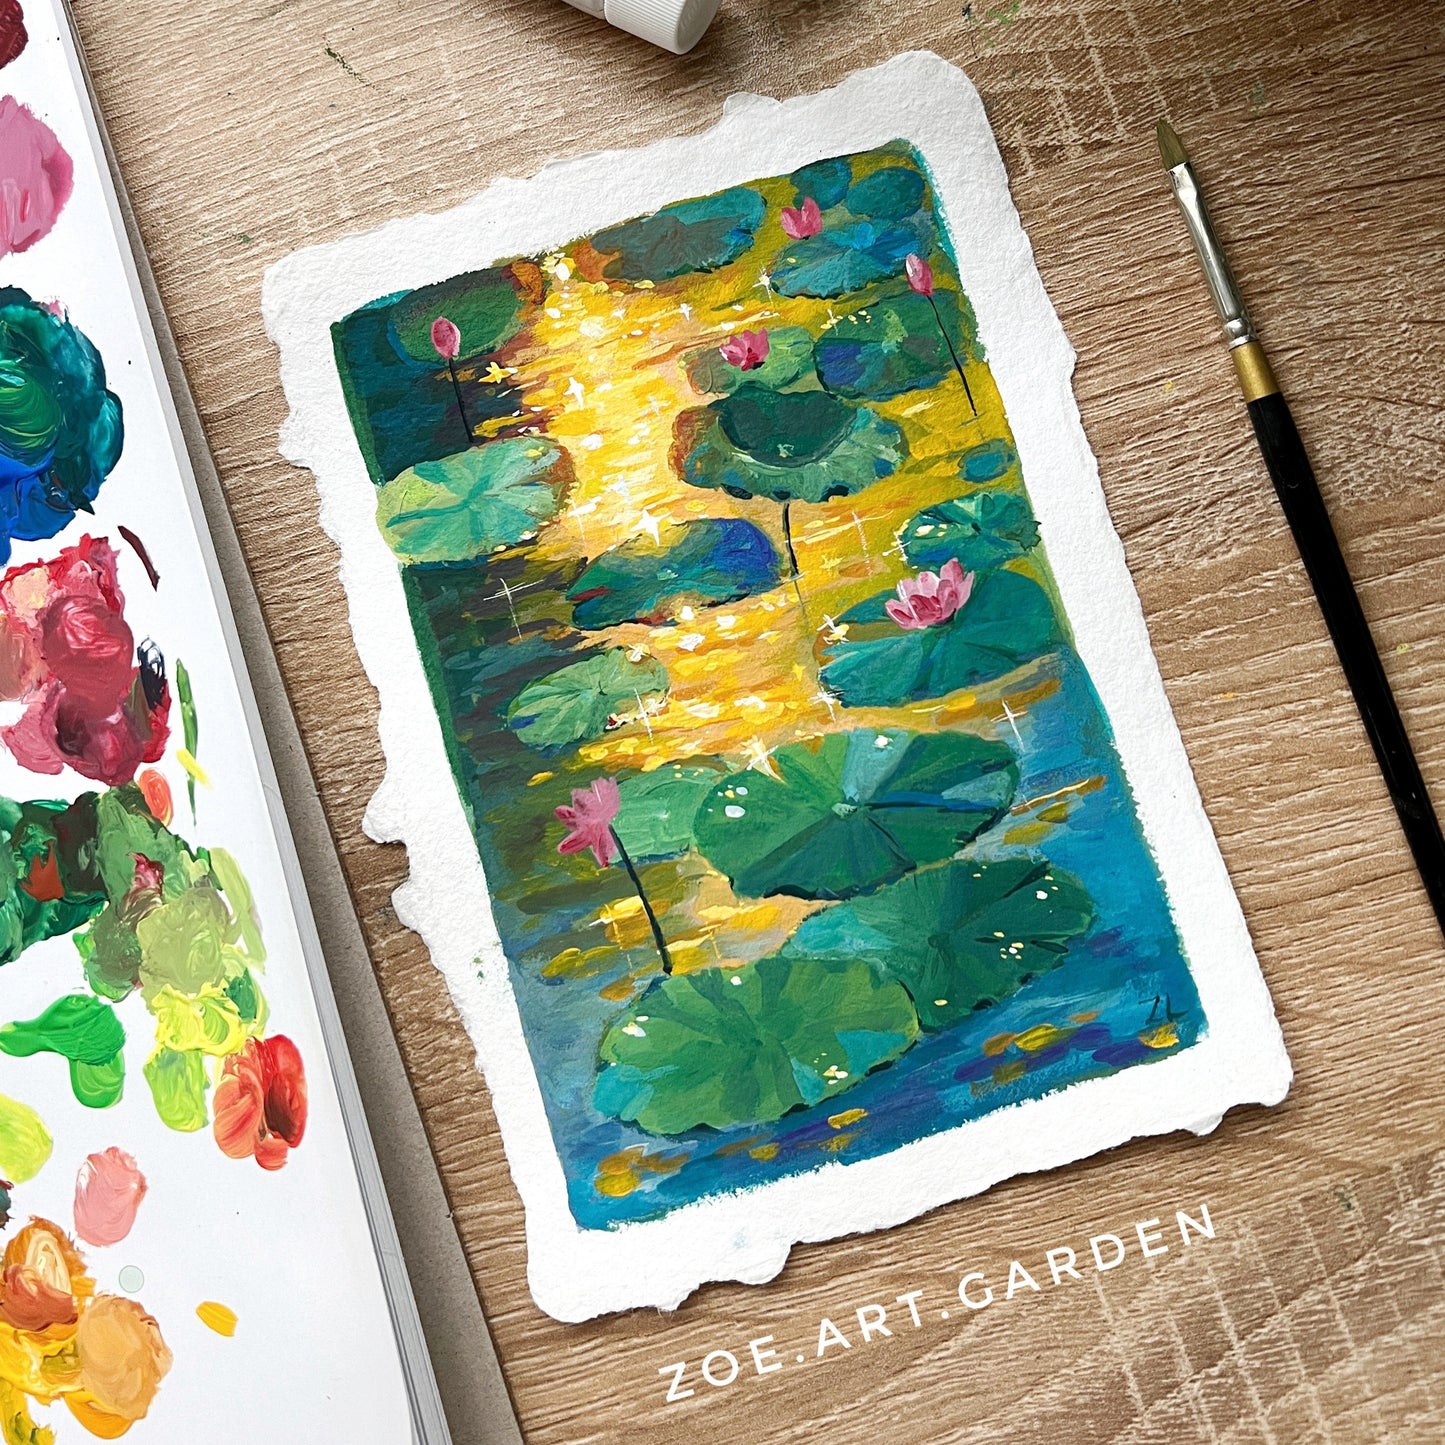 Water lily pond- Original Gouache painting- Water lily in the sunset